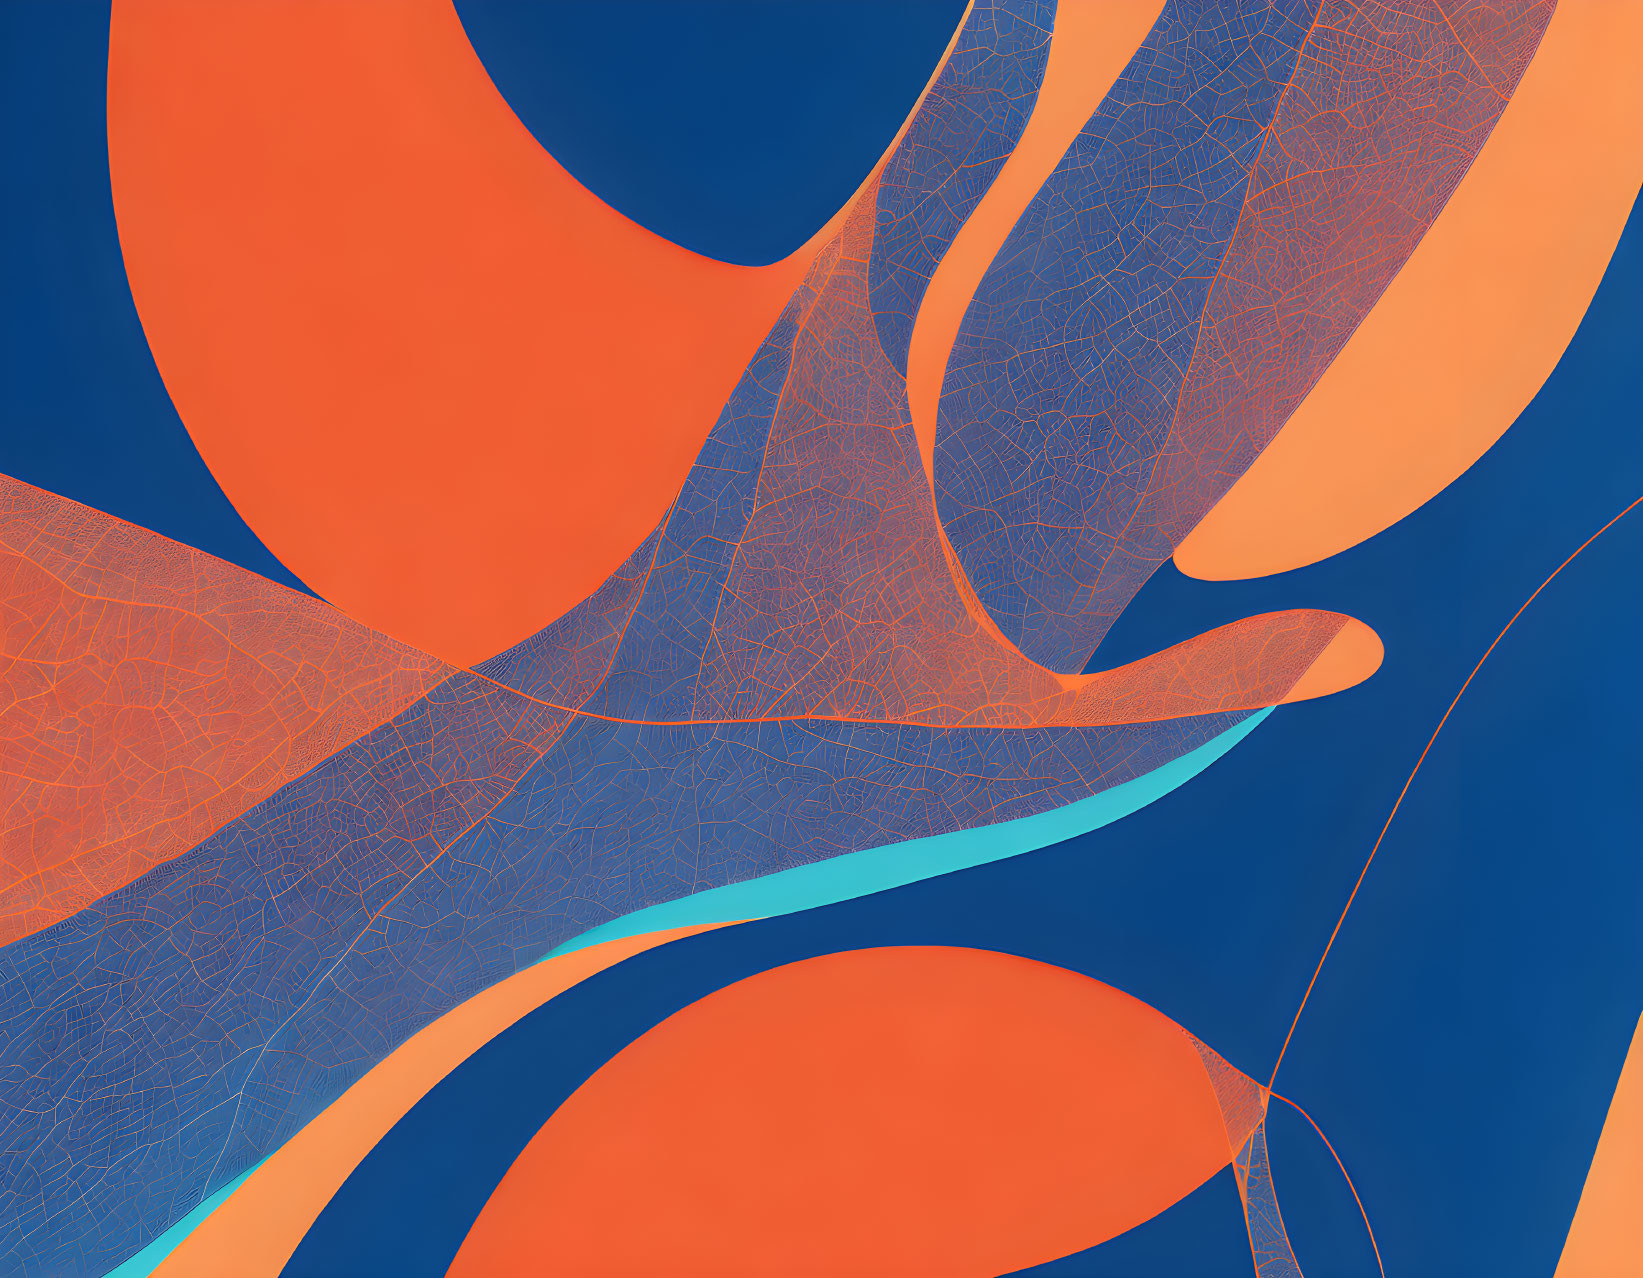 Orange and Blue Curvy Shapes with Web-Like Texture on Deep Blue Background